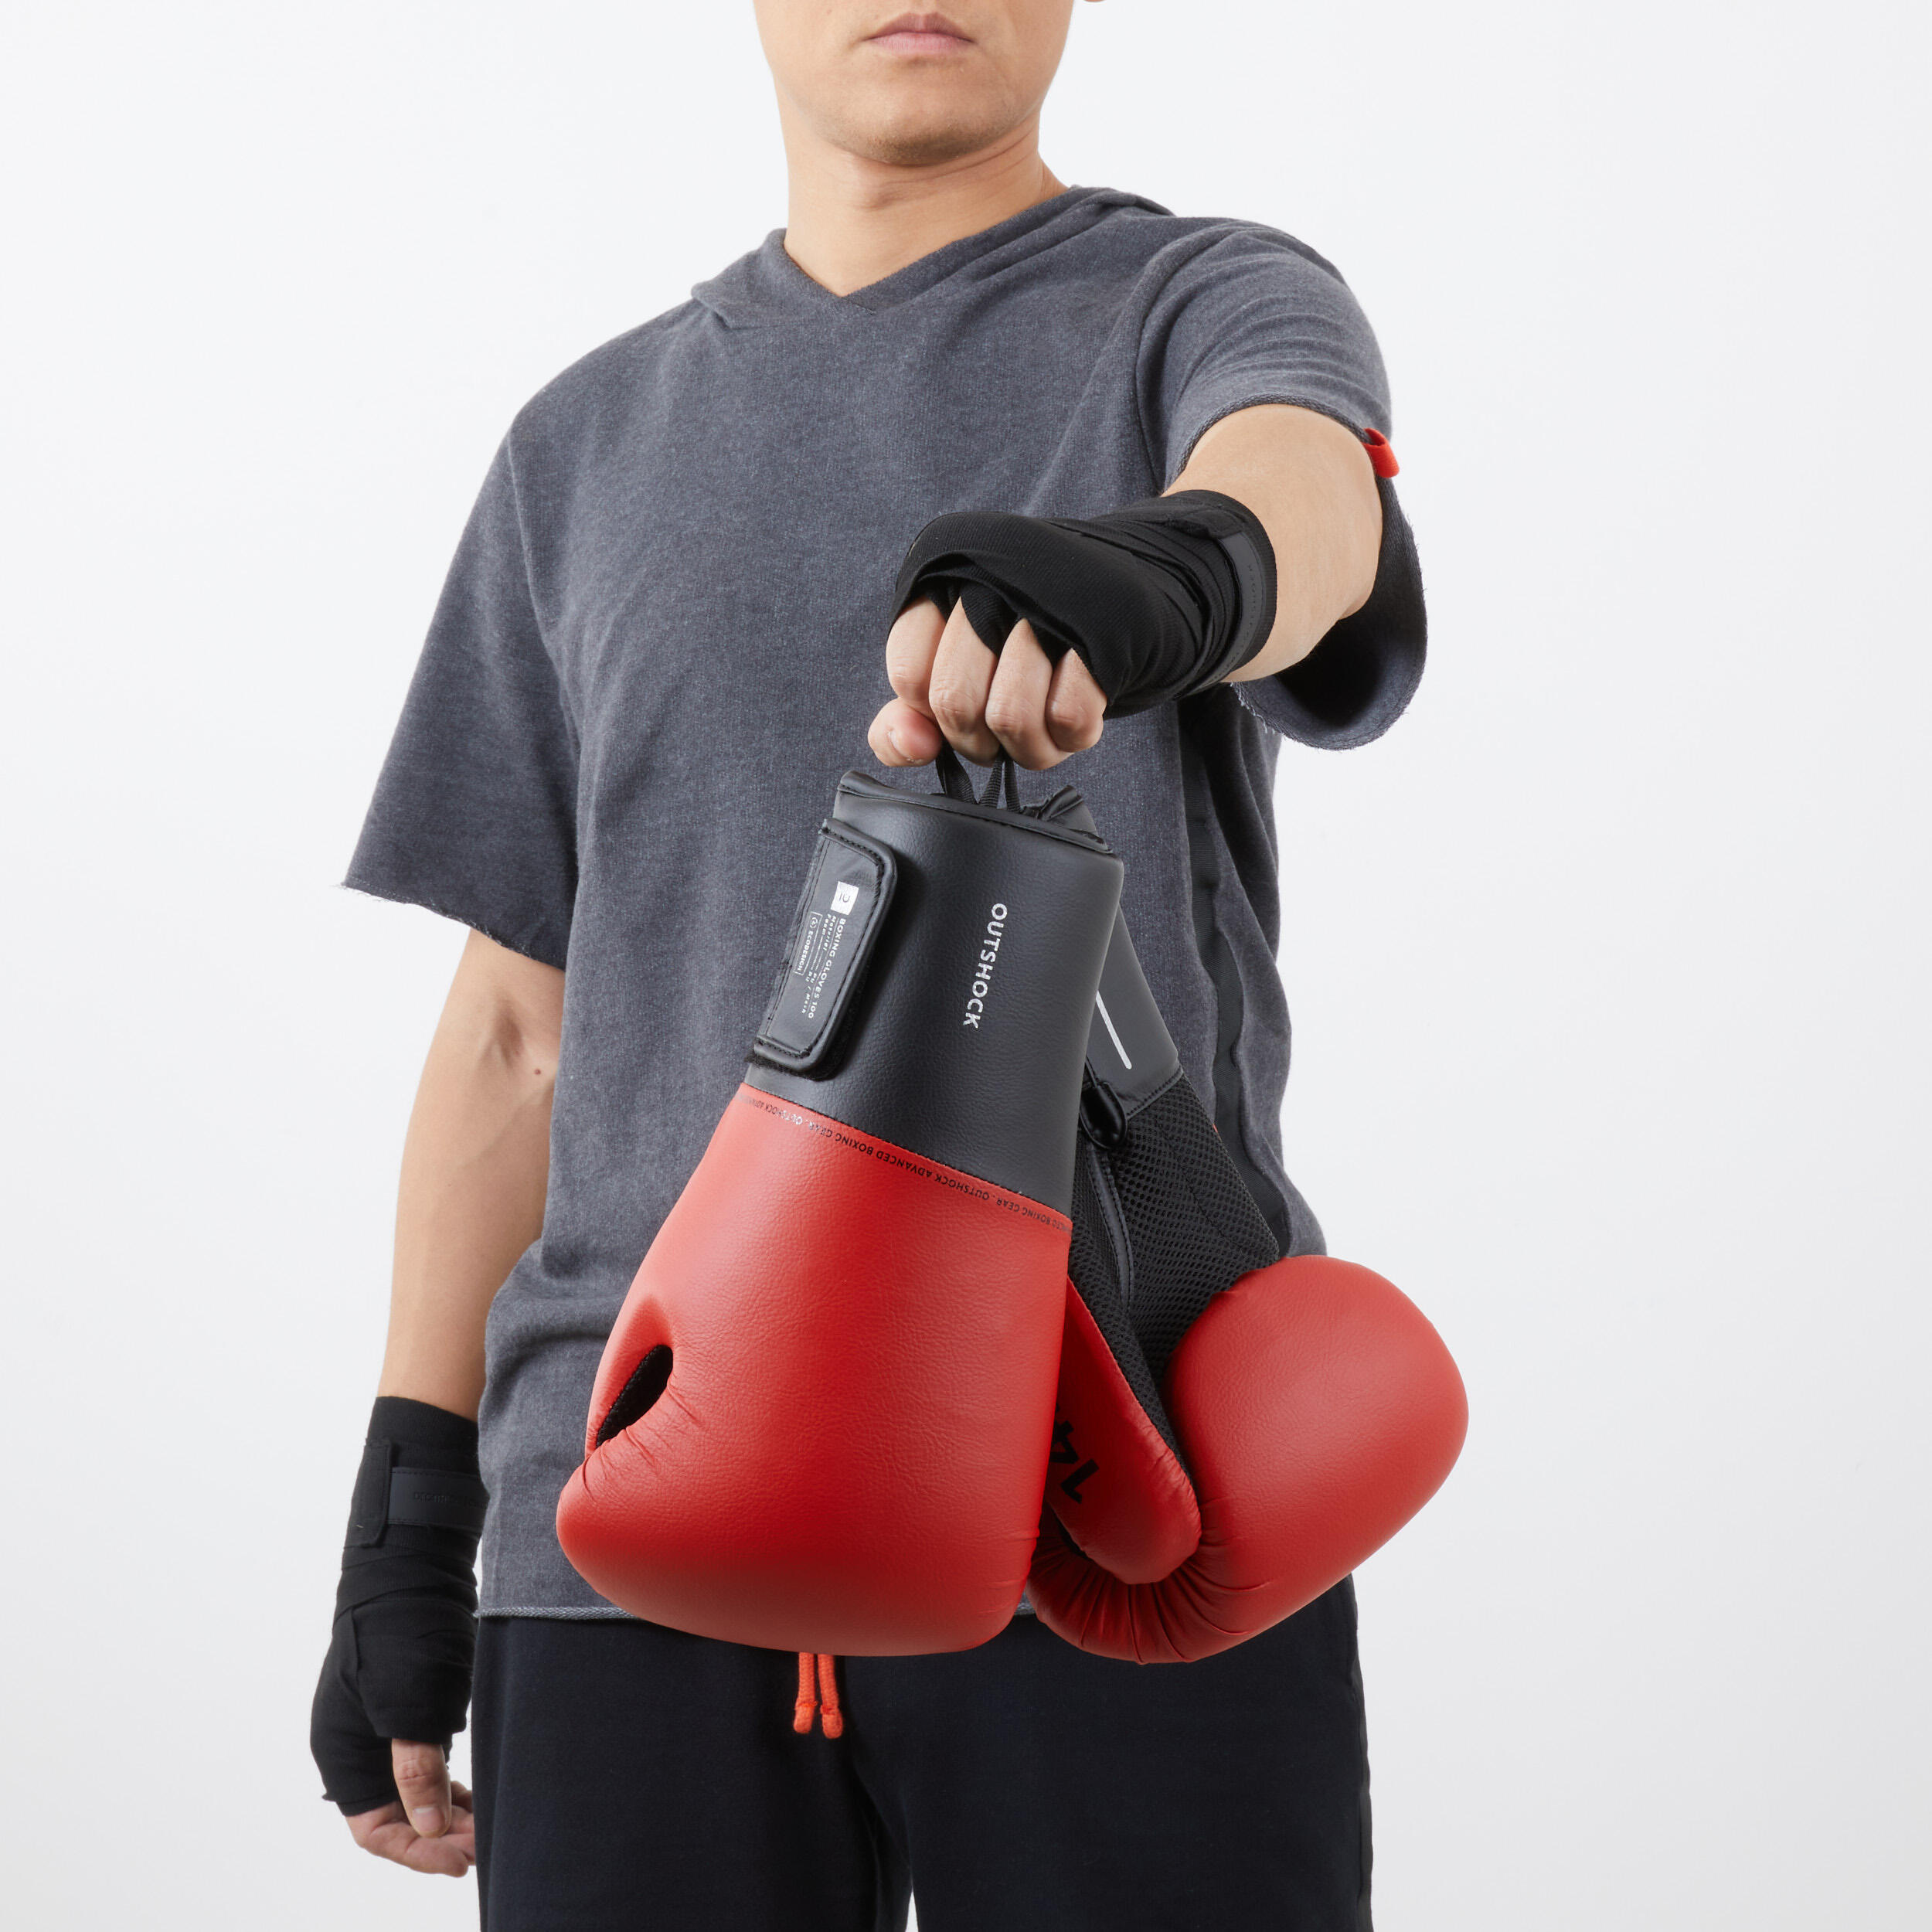 Boxing Gloves 100 - Red 5/7